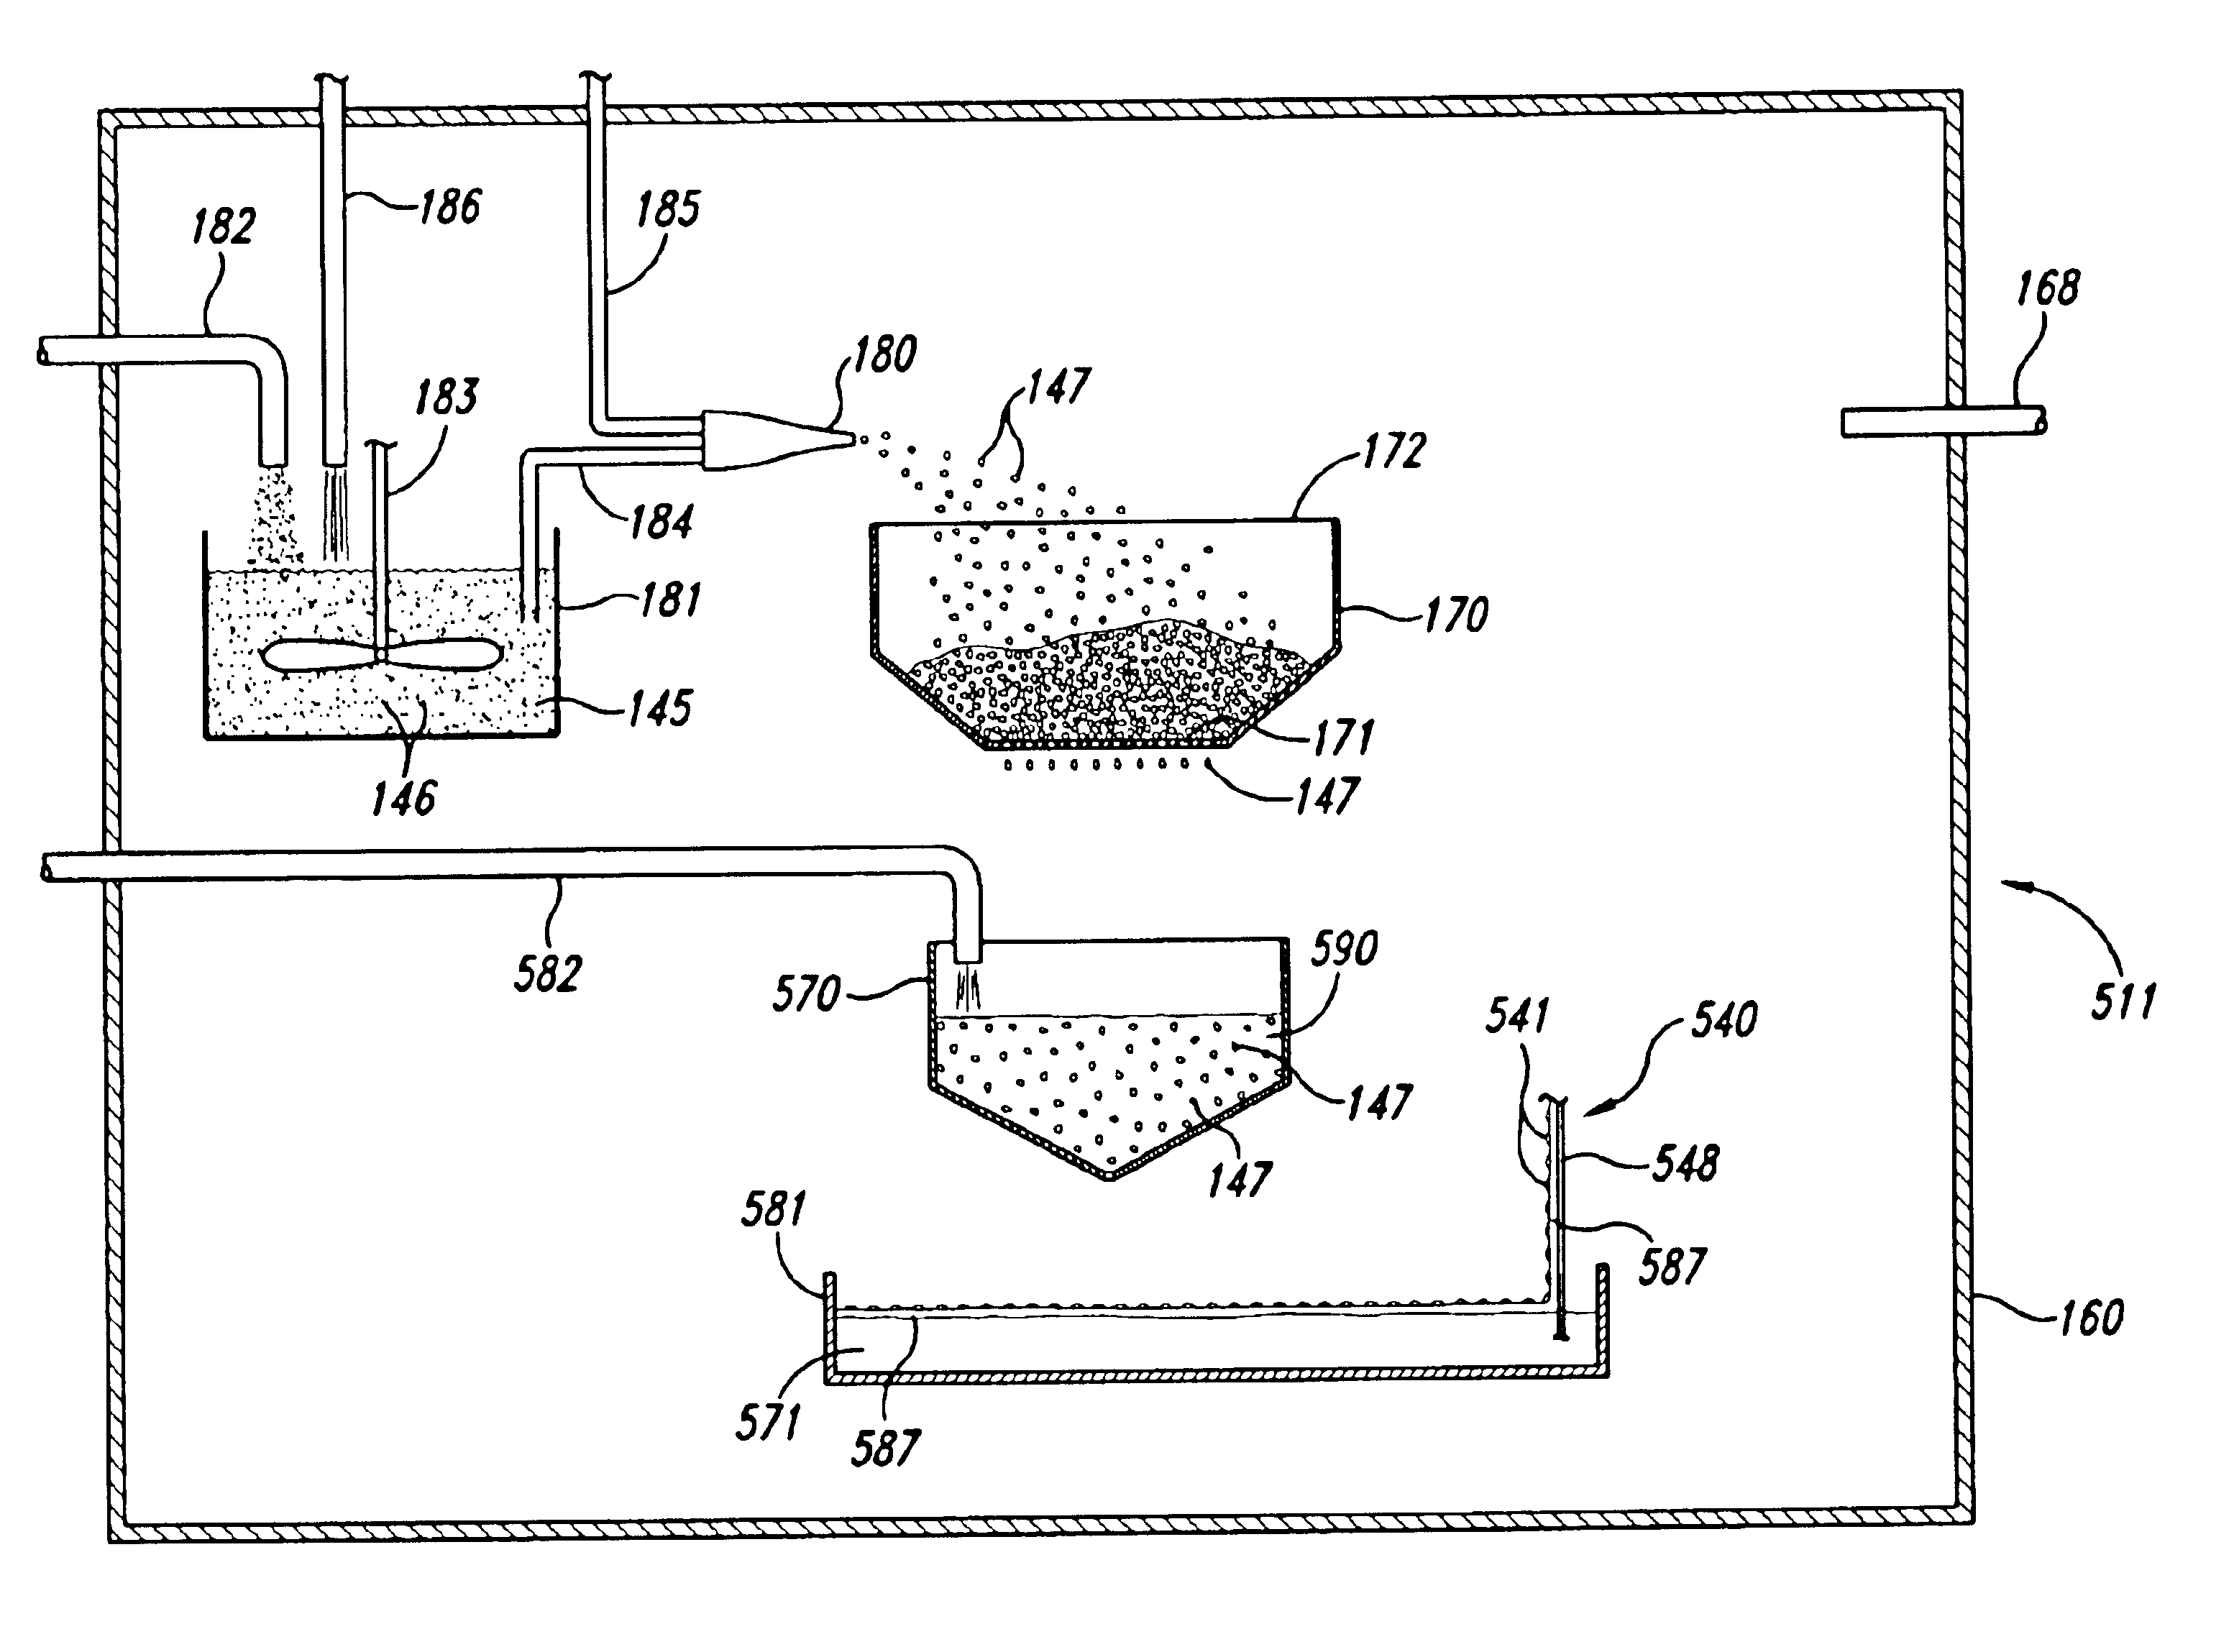 Method and apparatus for forming a planarizing pad having a film and texture elements for planarization of microelectronic substrates